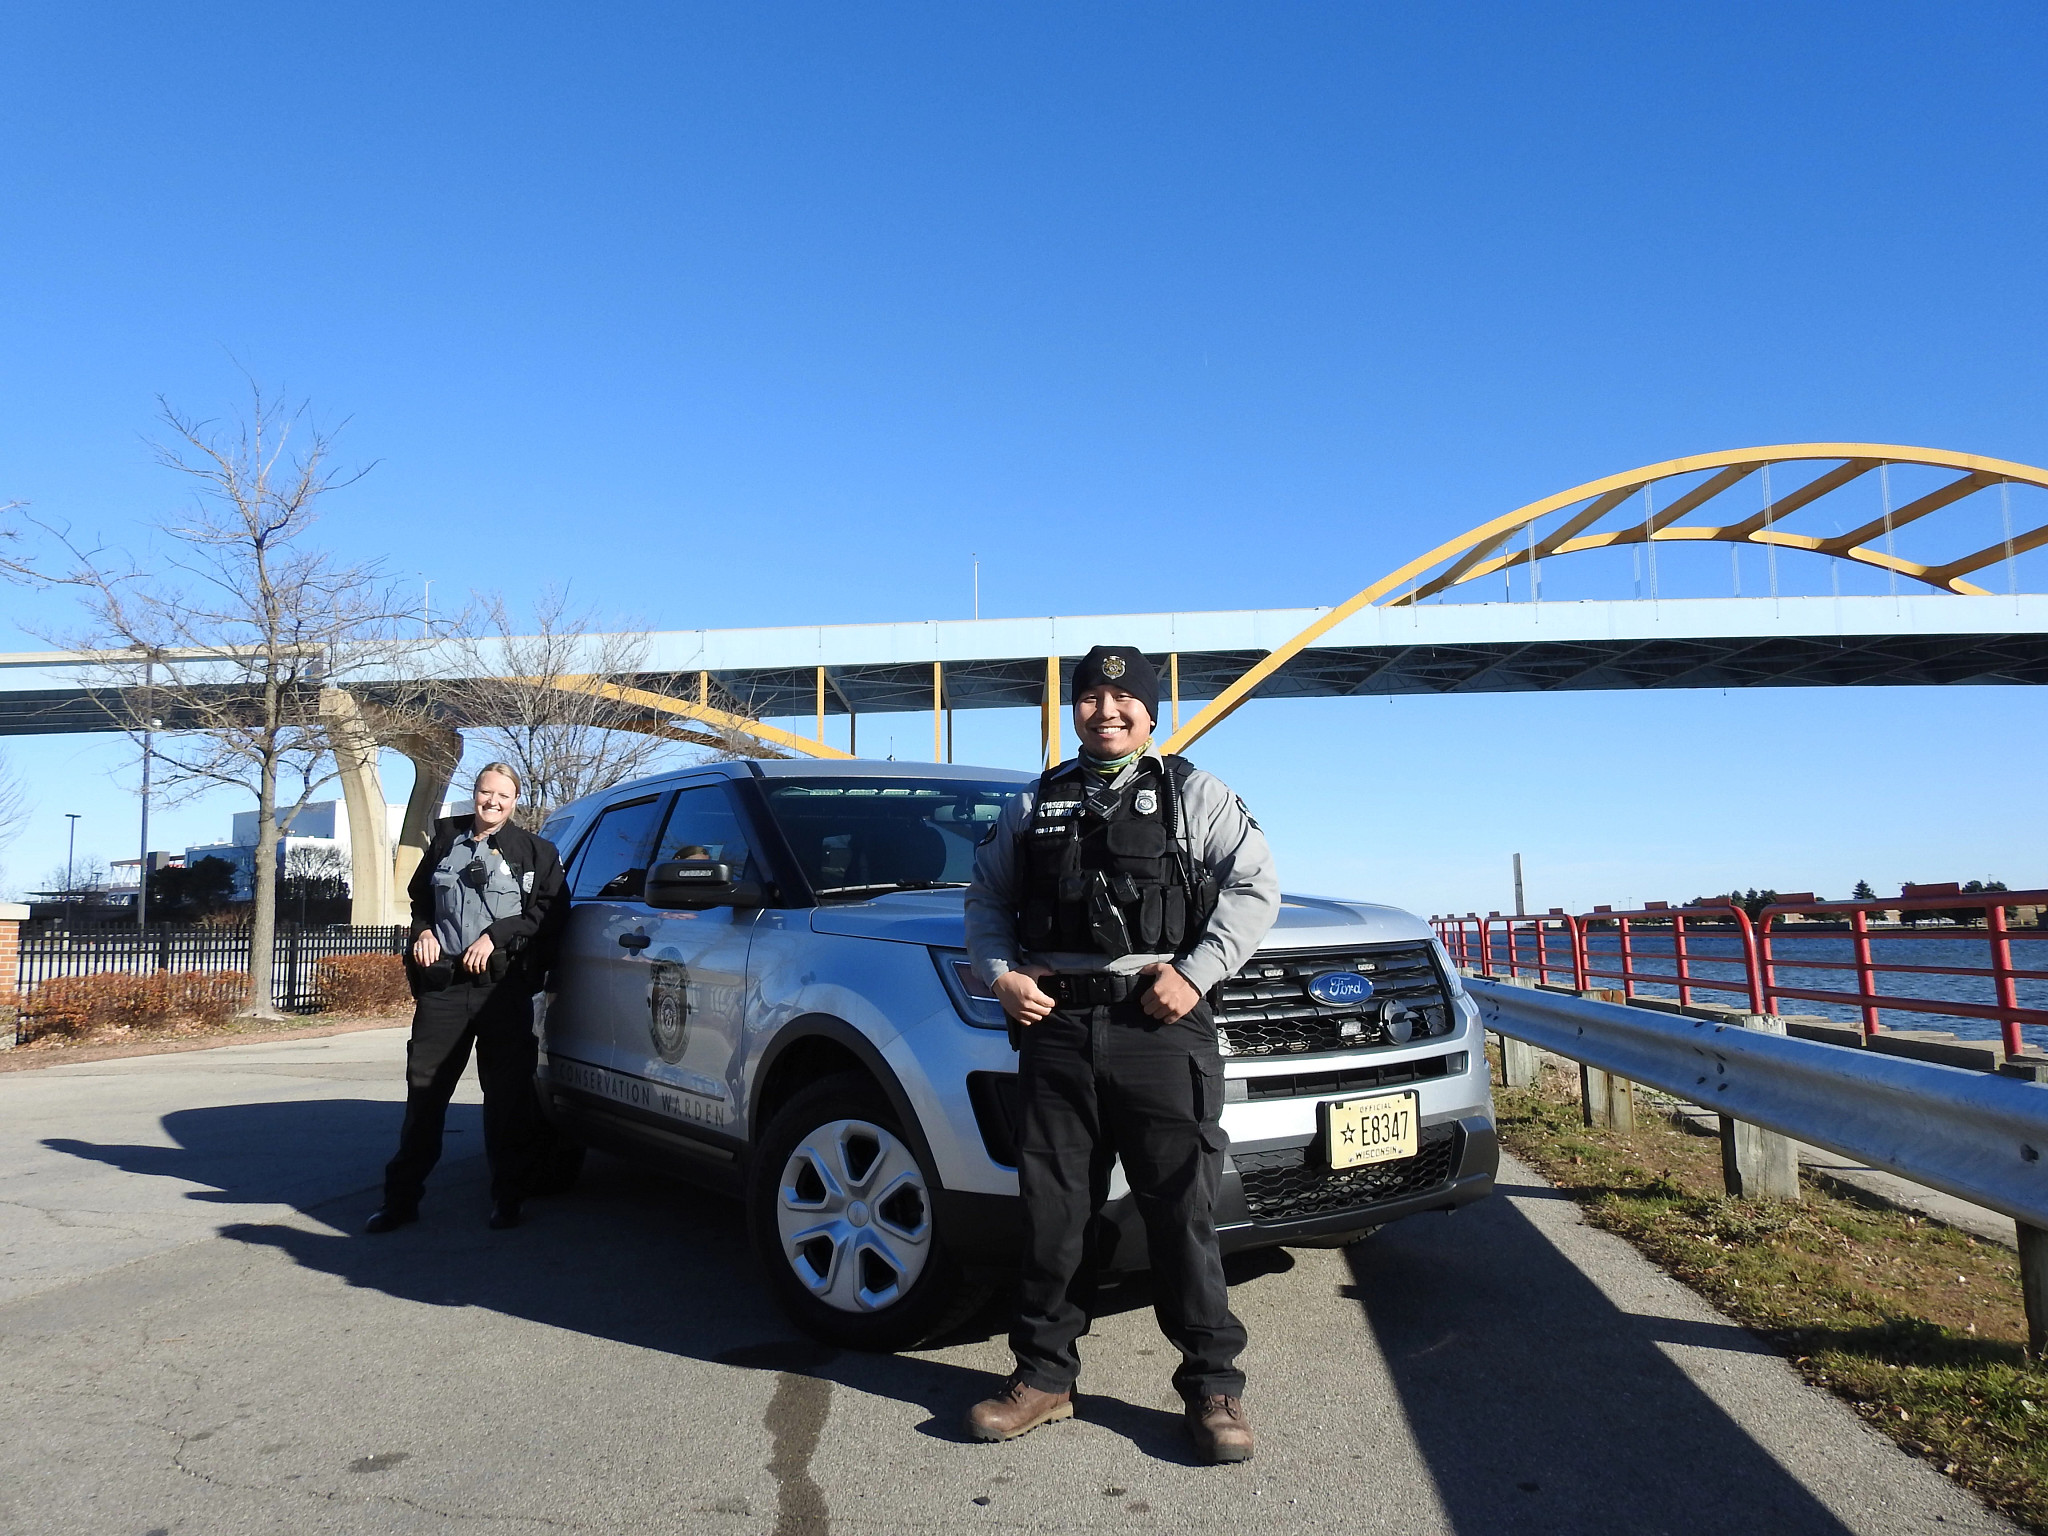 two DNR conservation wardens standing in front of a DNR vehicle on a bridge